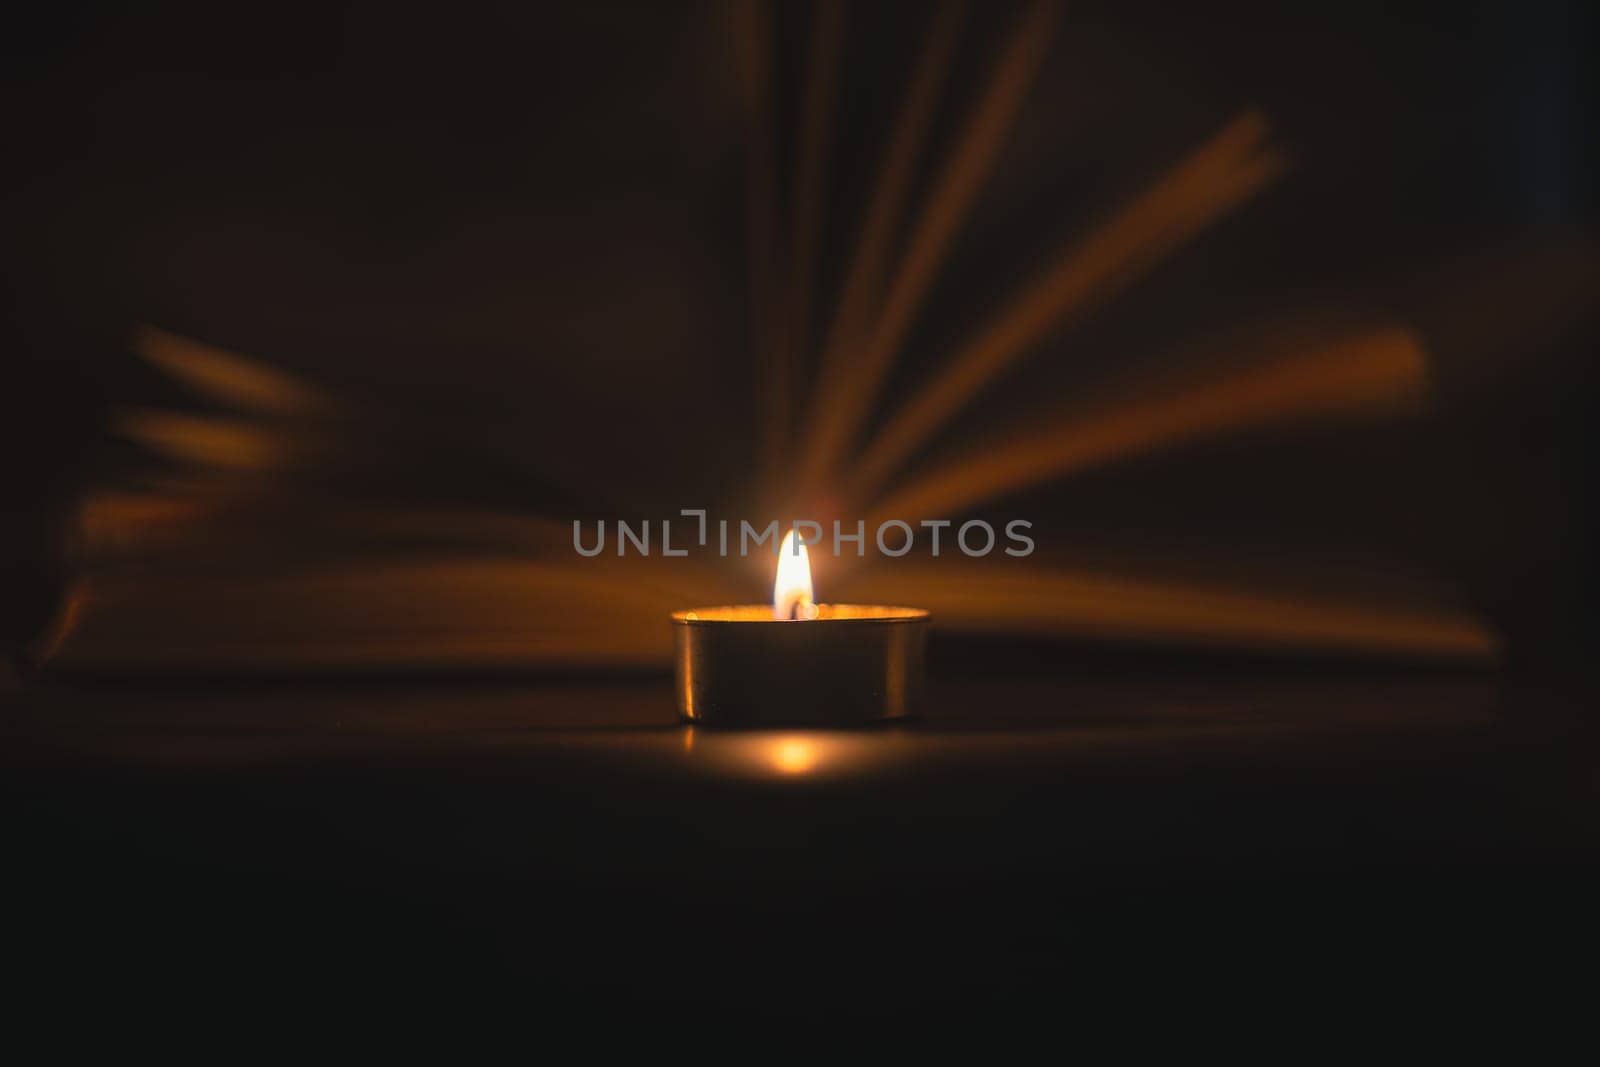 The Book in the candlelight. High quality photo